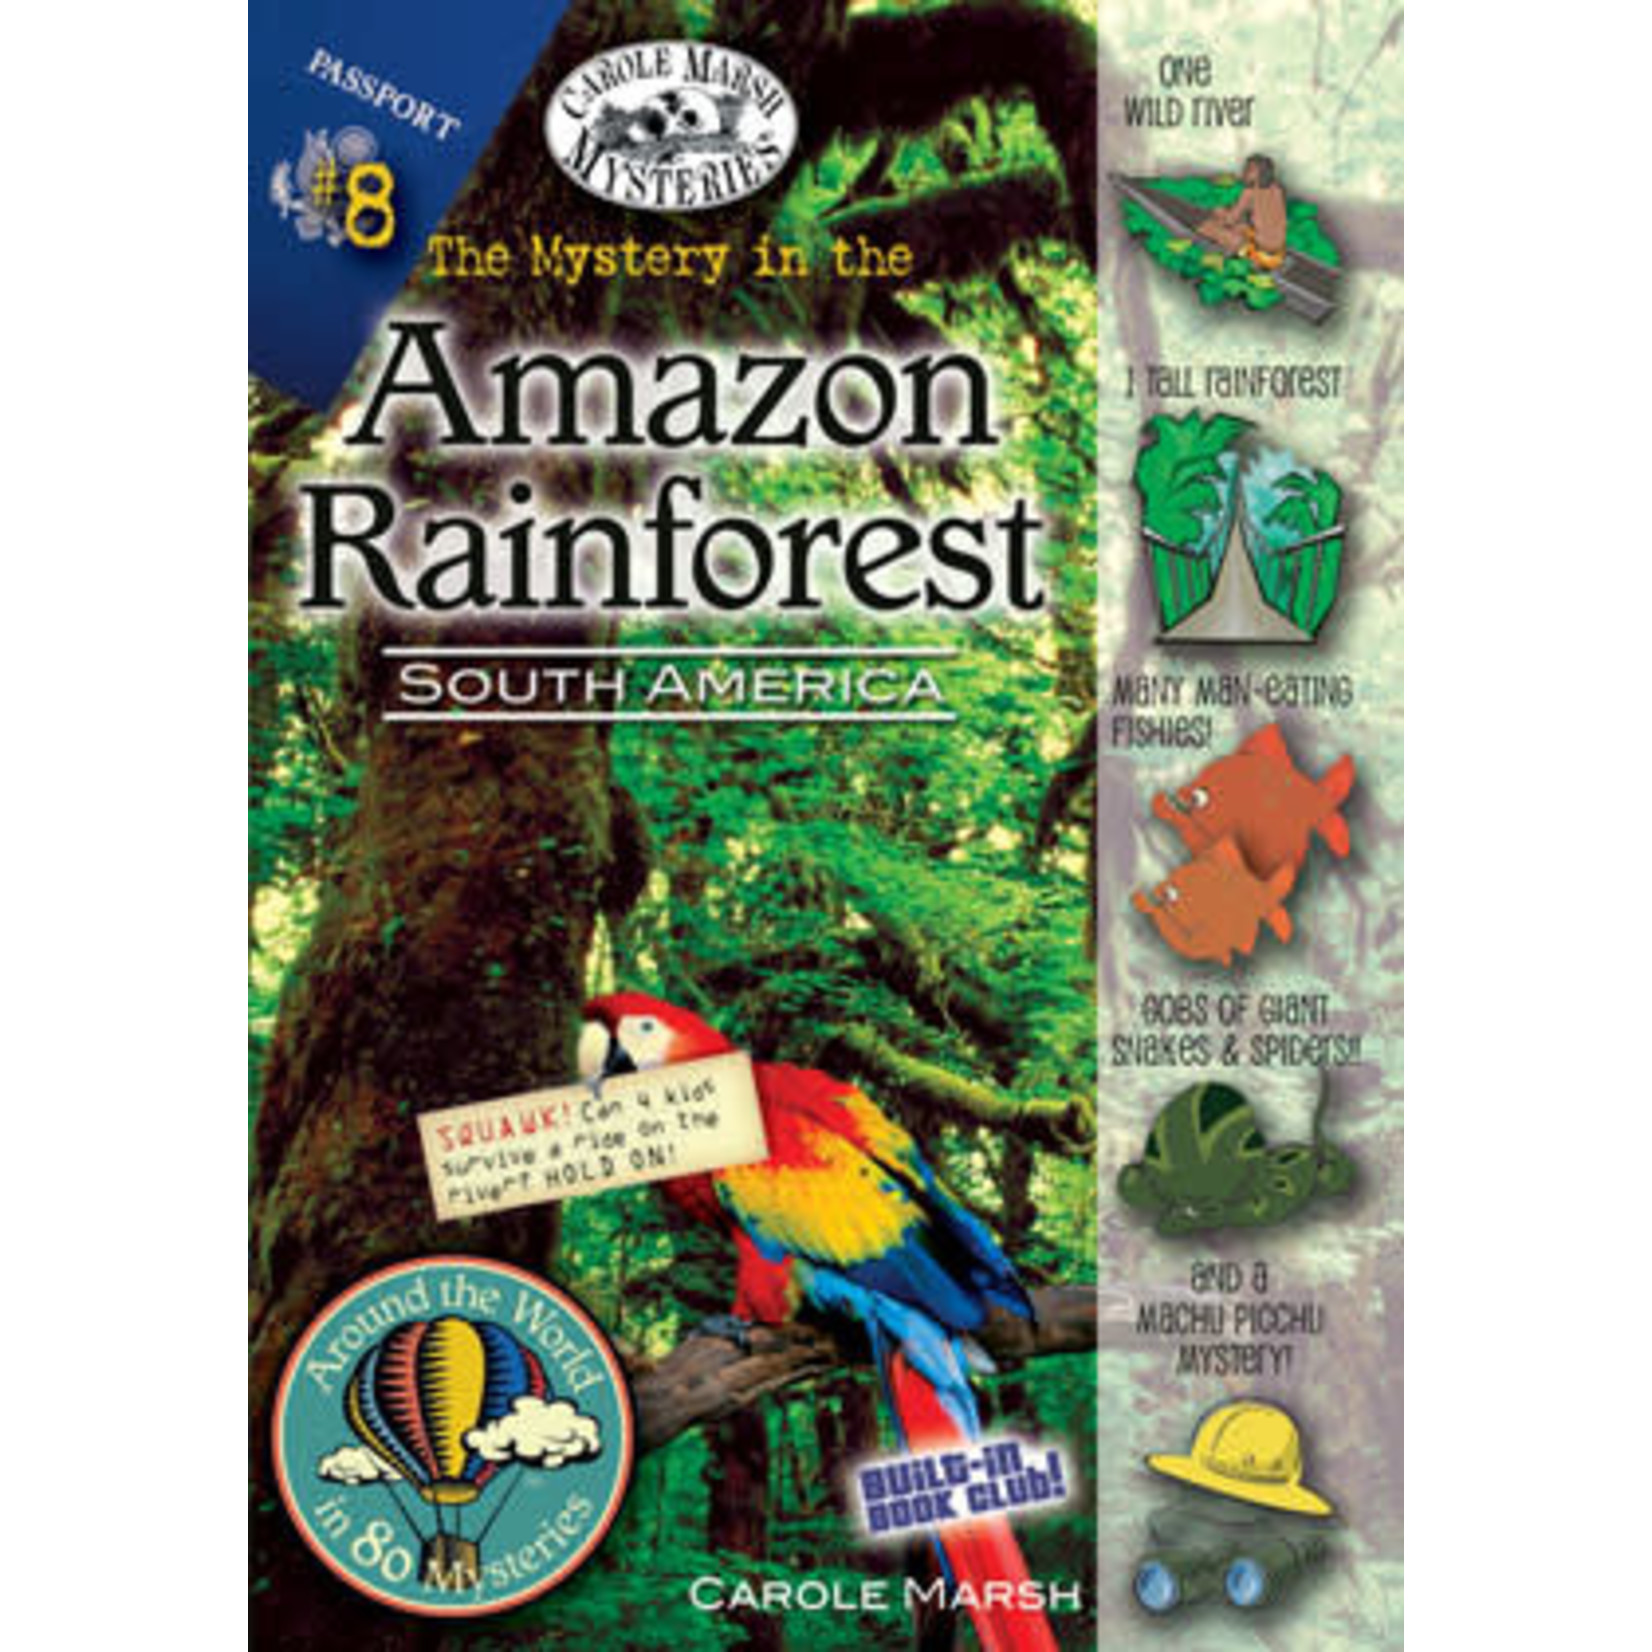 The Mystery in the Amazon Rainforest (South America)